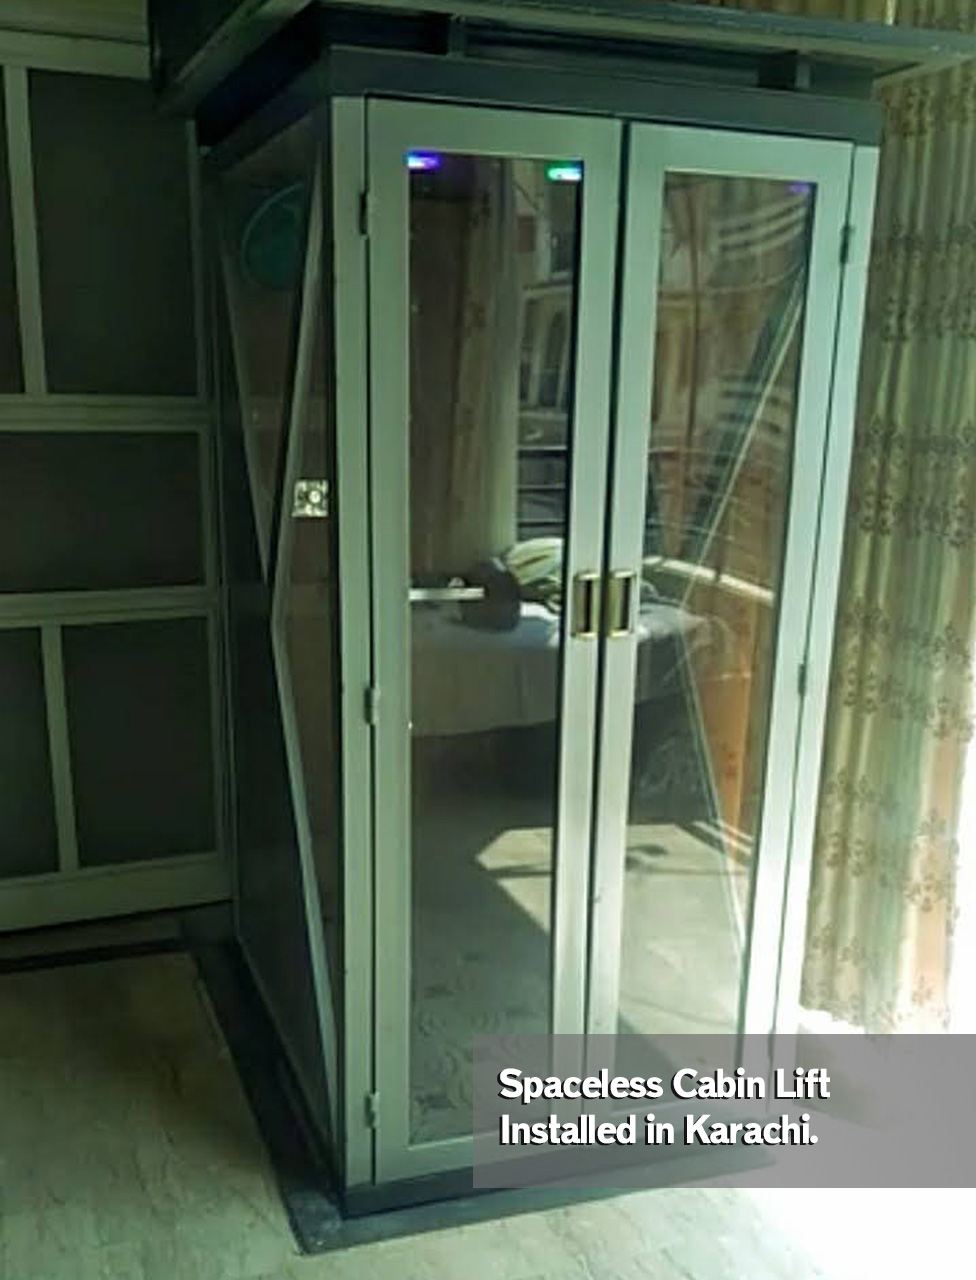 spaceless cabin lift